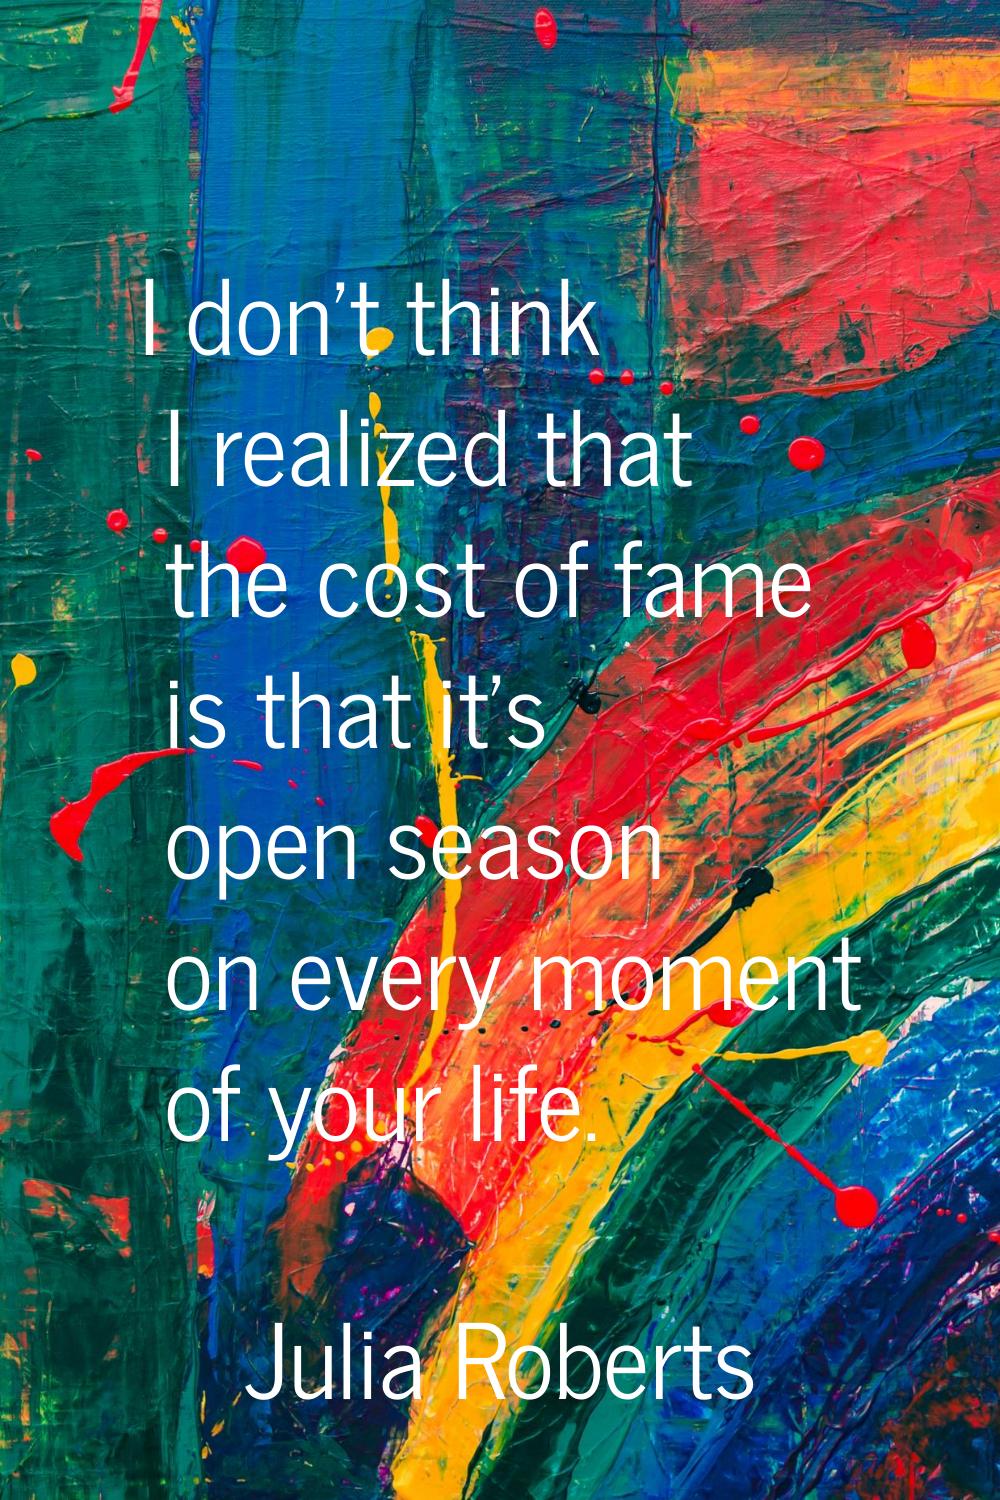 I don't think I realized that the cost of fame is that it's open season on every moment of your lif